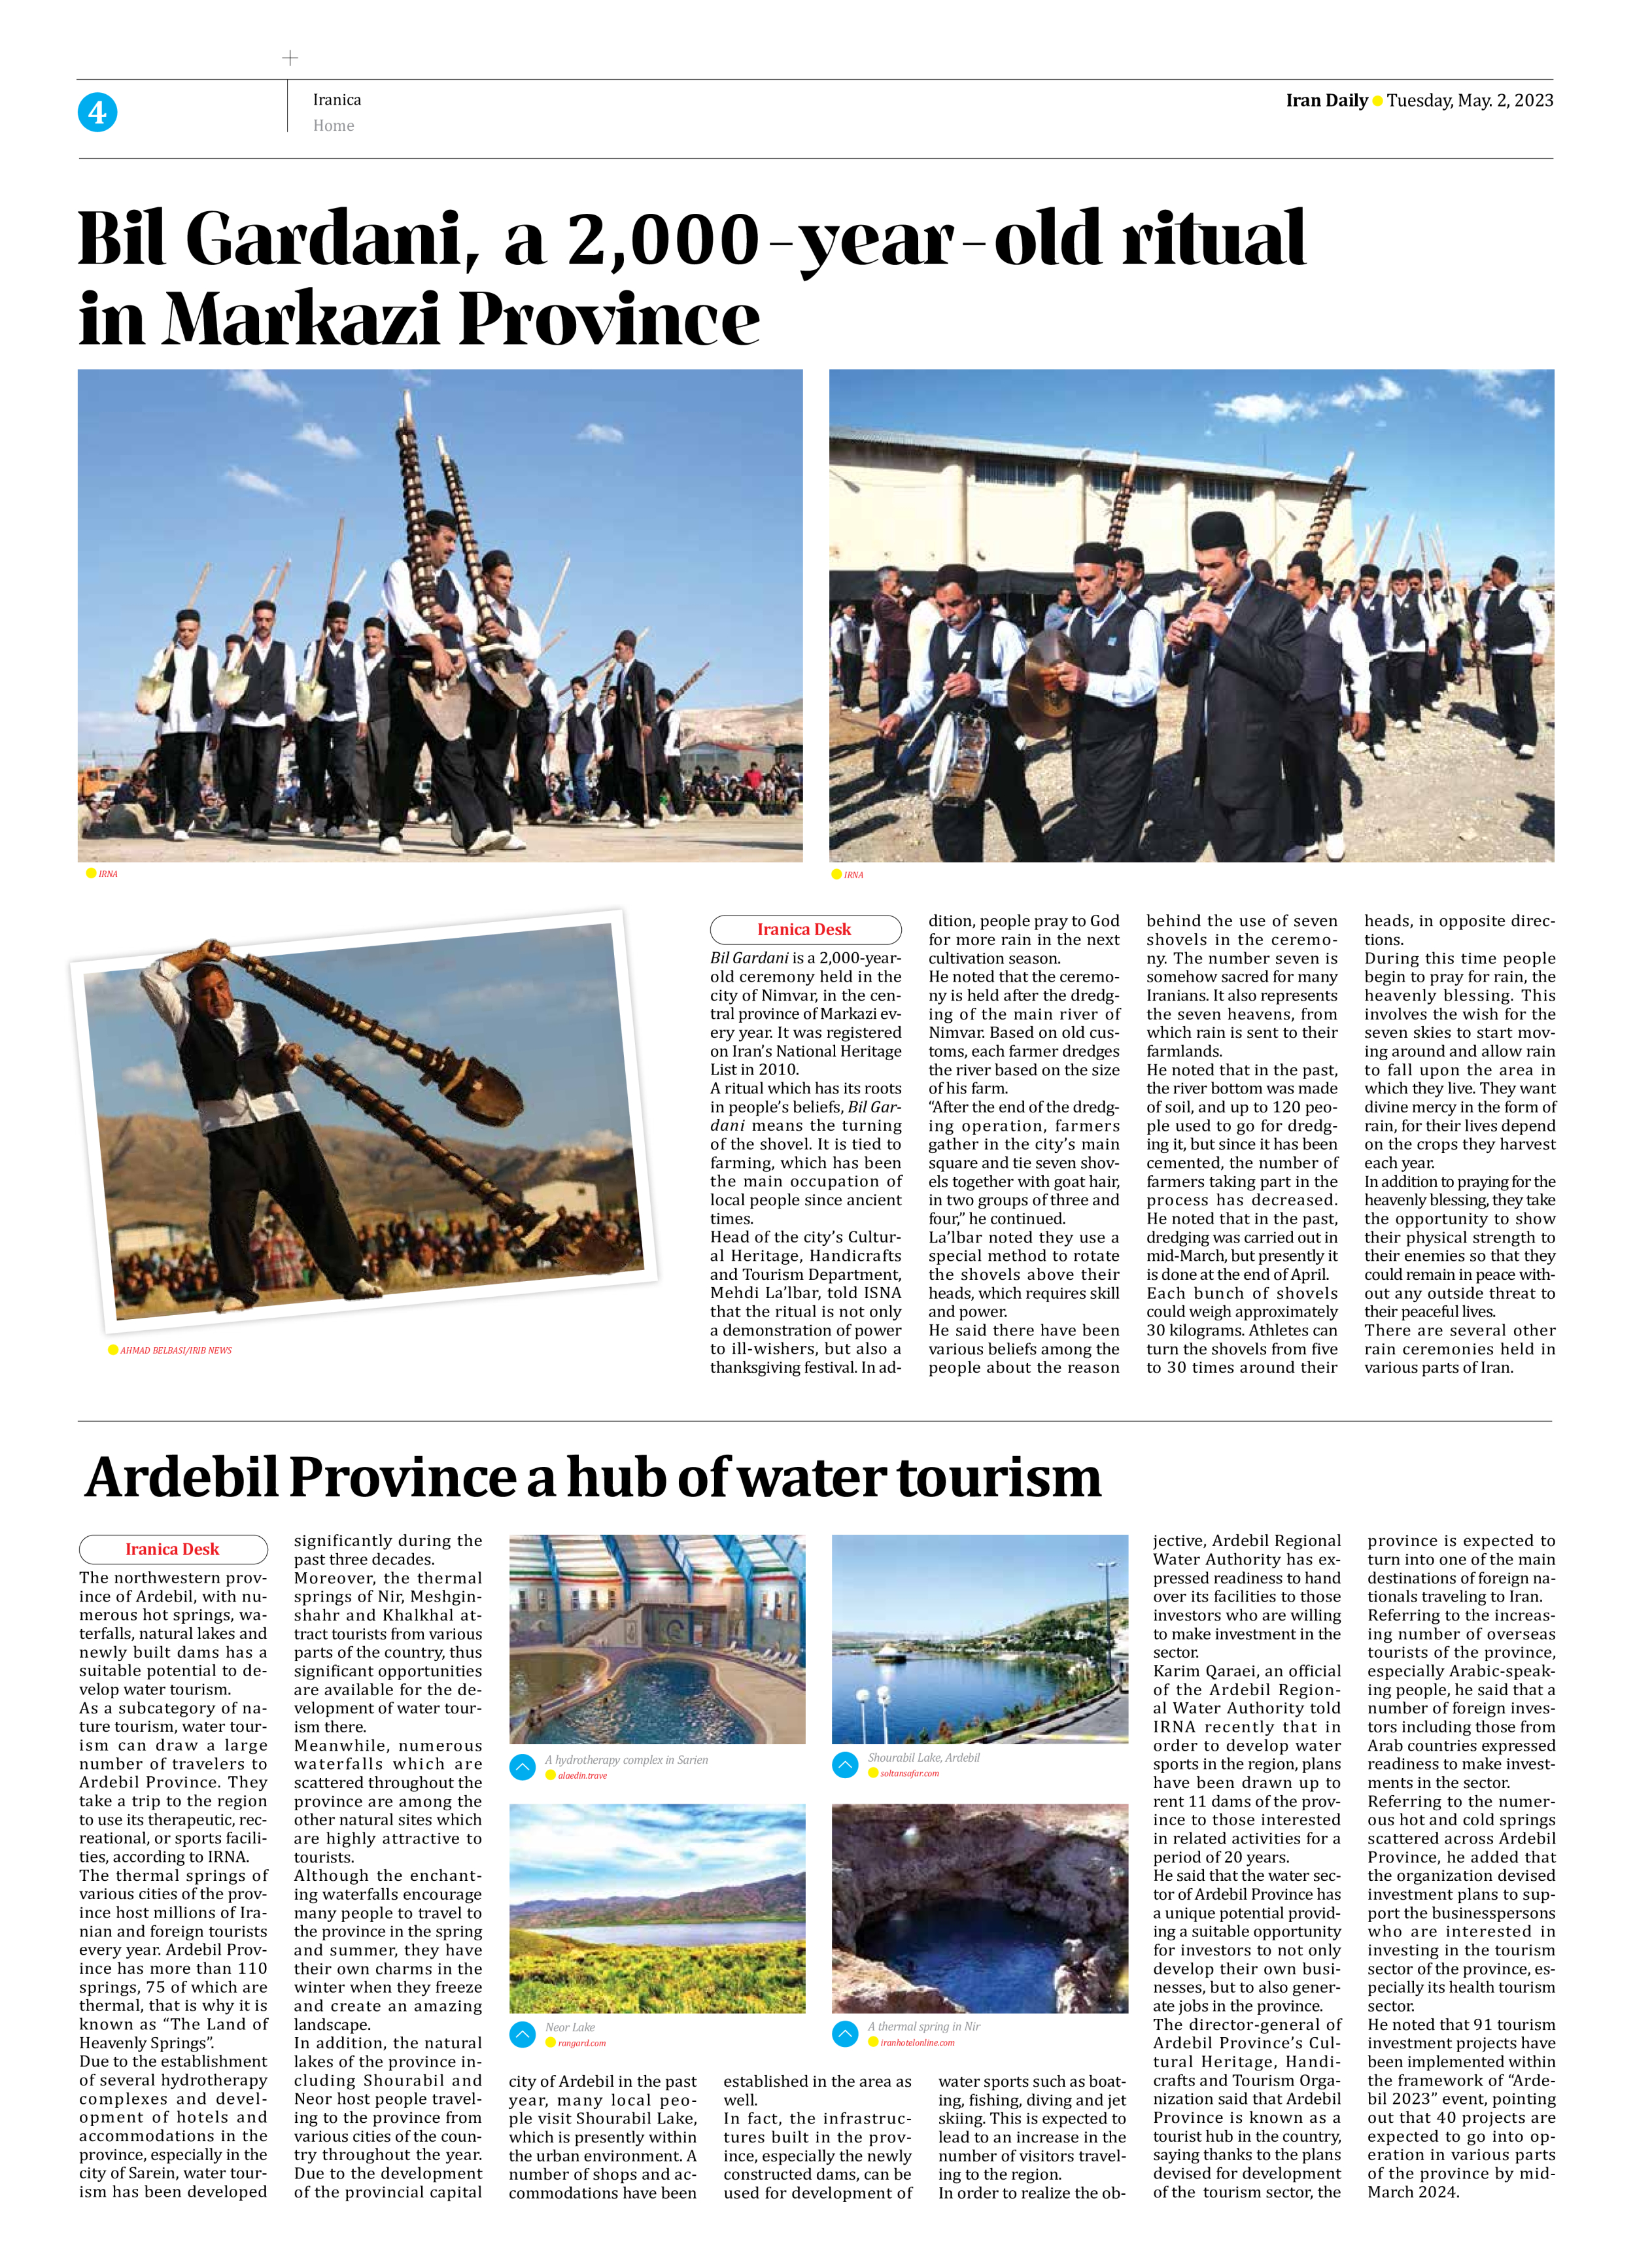 Iran Daily - Number Seven Thousand Two Hundred and Eighty One - 02 May 2023 - Page 4